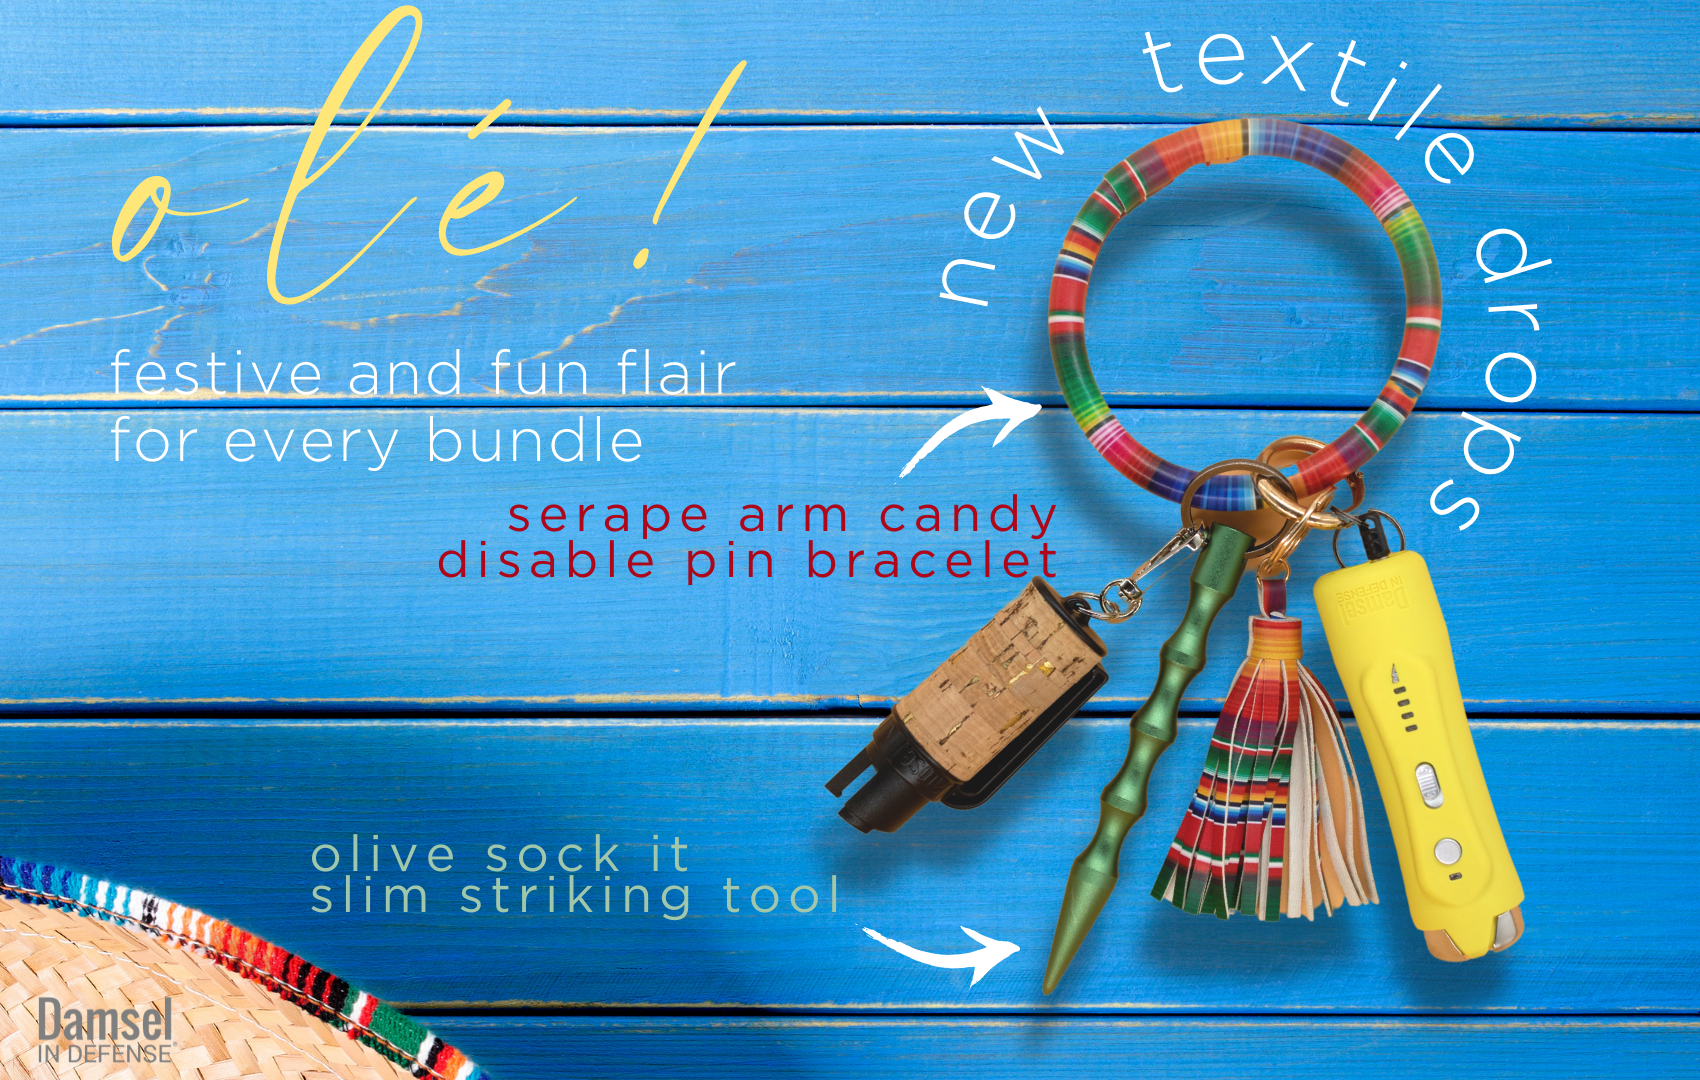 Meet Serape—Our Most Colorful Arm Candy Bracelet Yet! - Damsel In